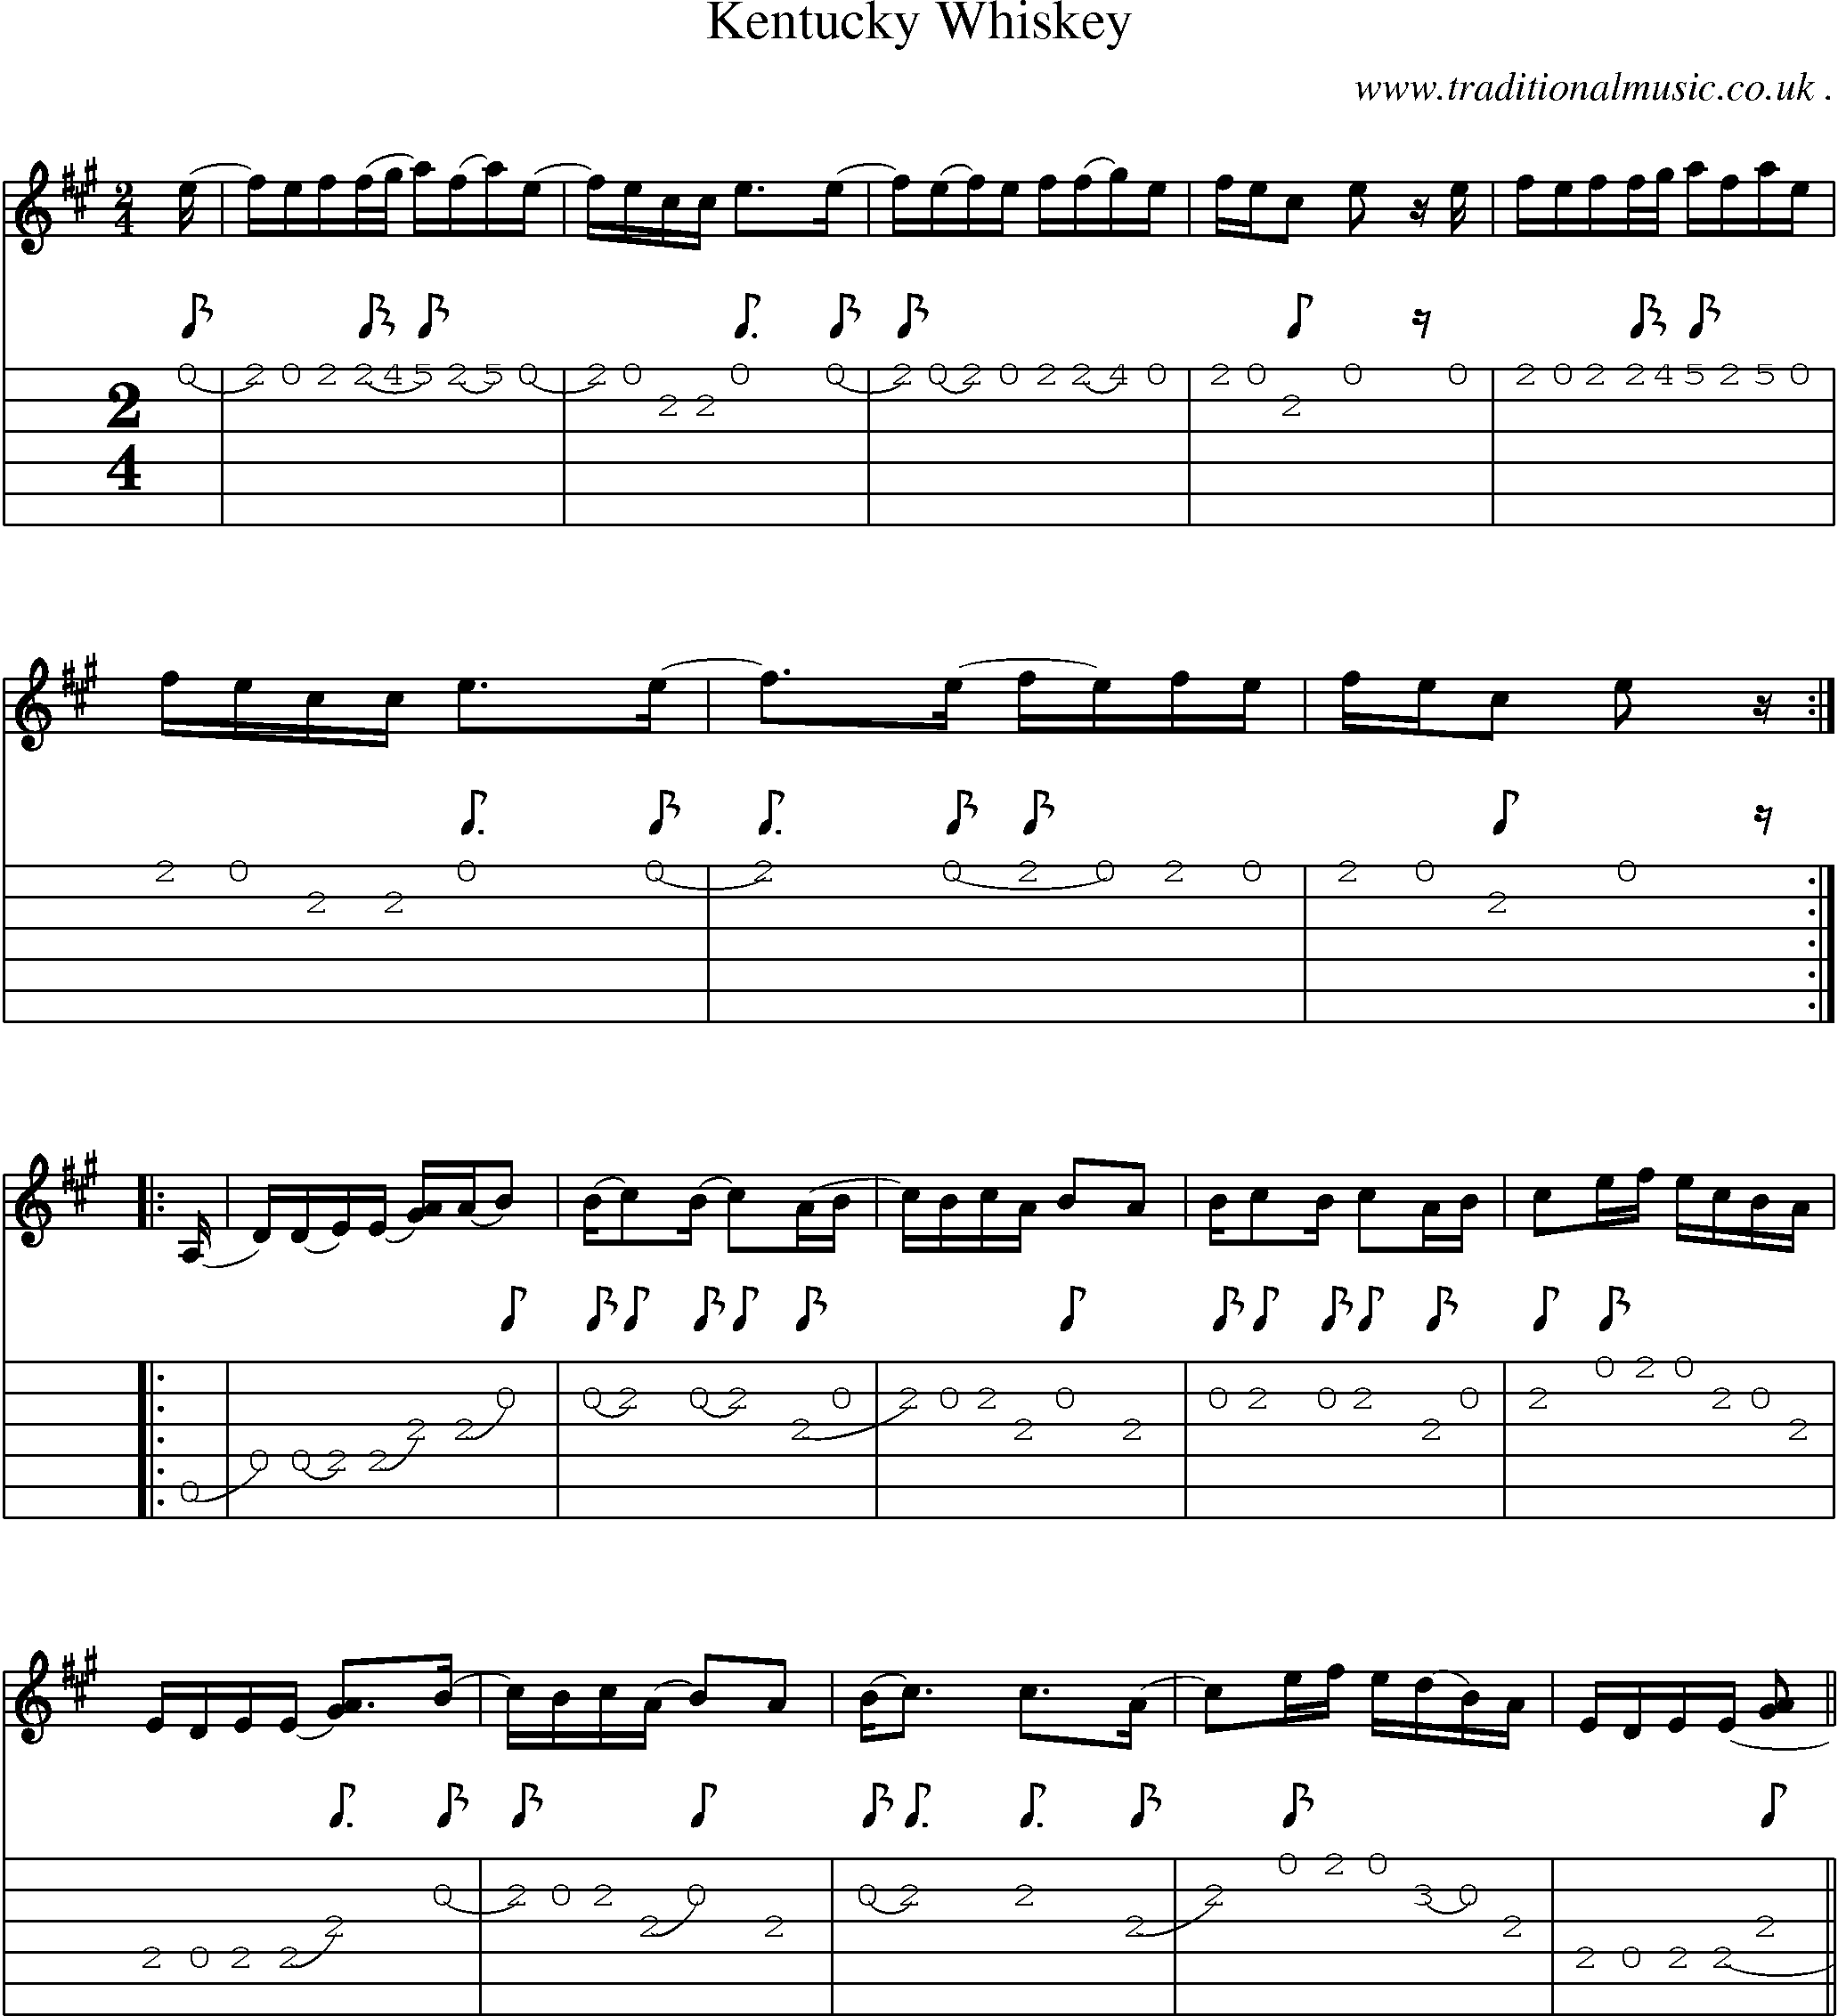 Music Score and Guitar Tabs for Kentucky Whiskey